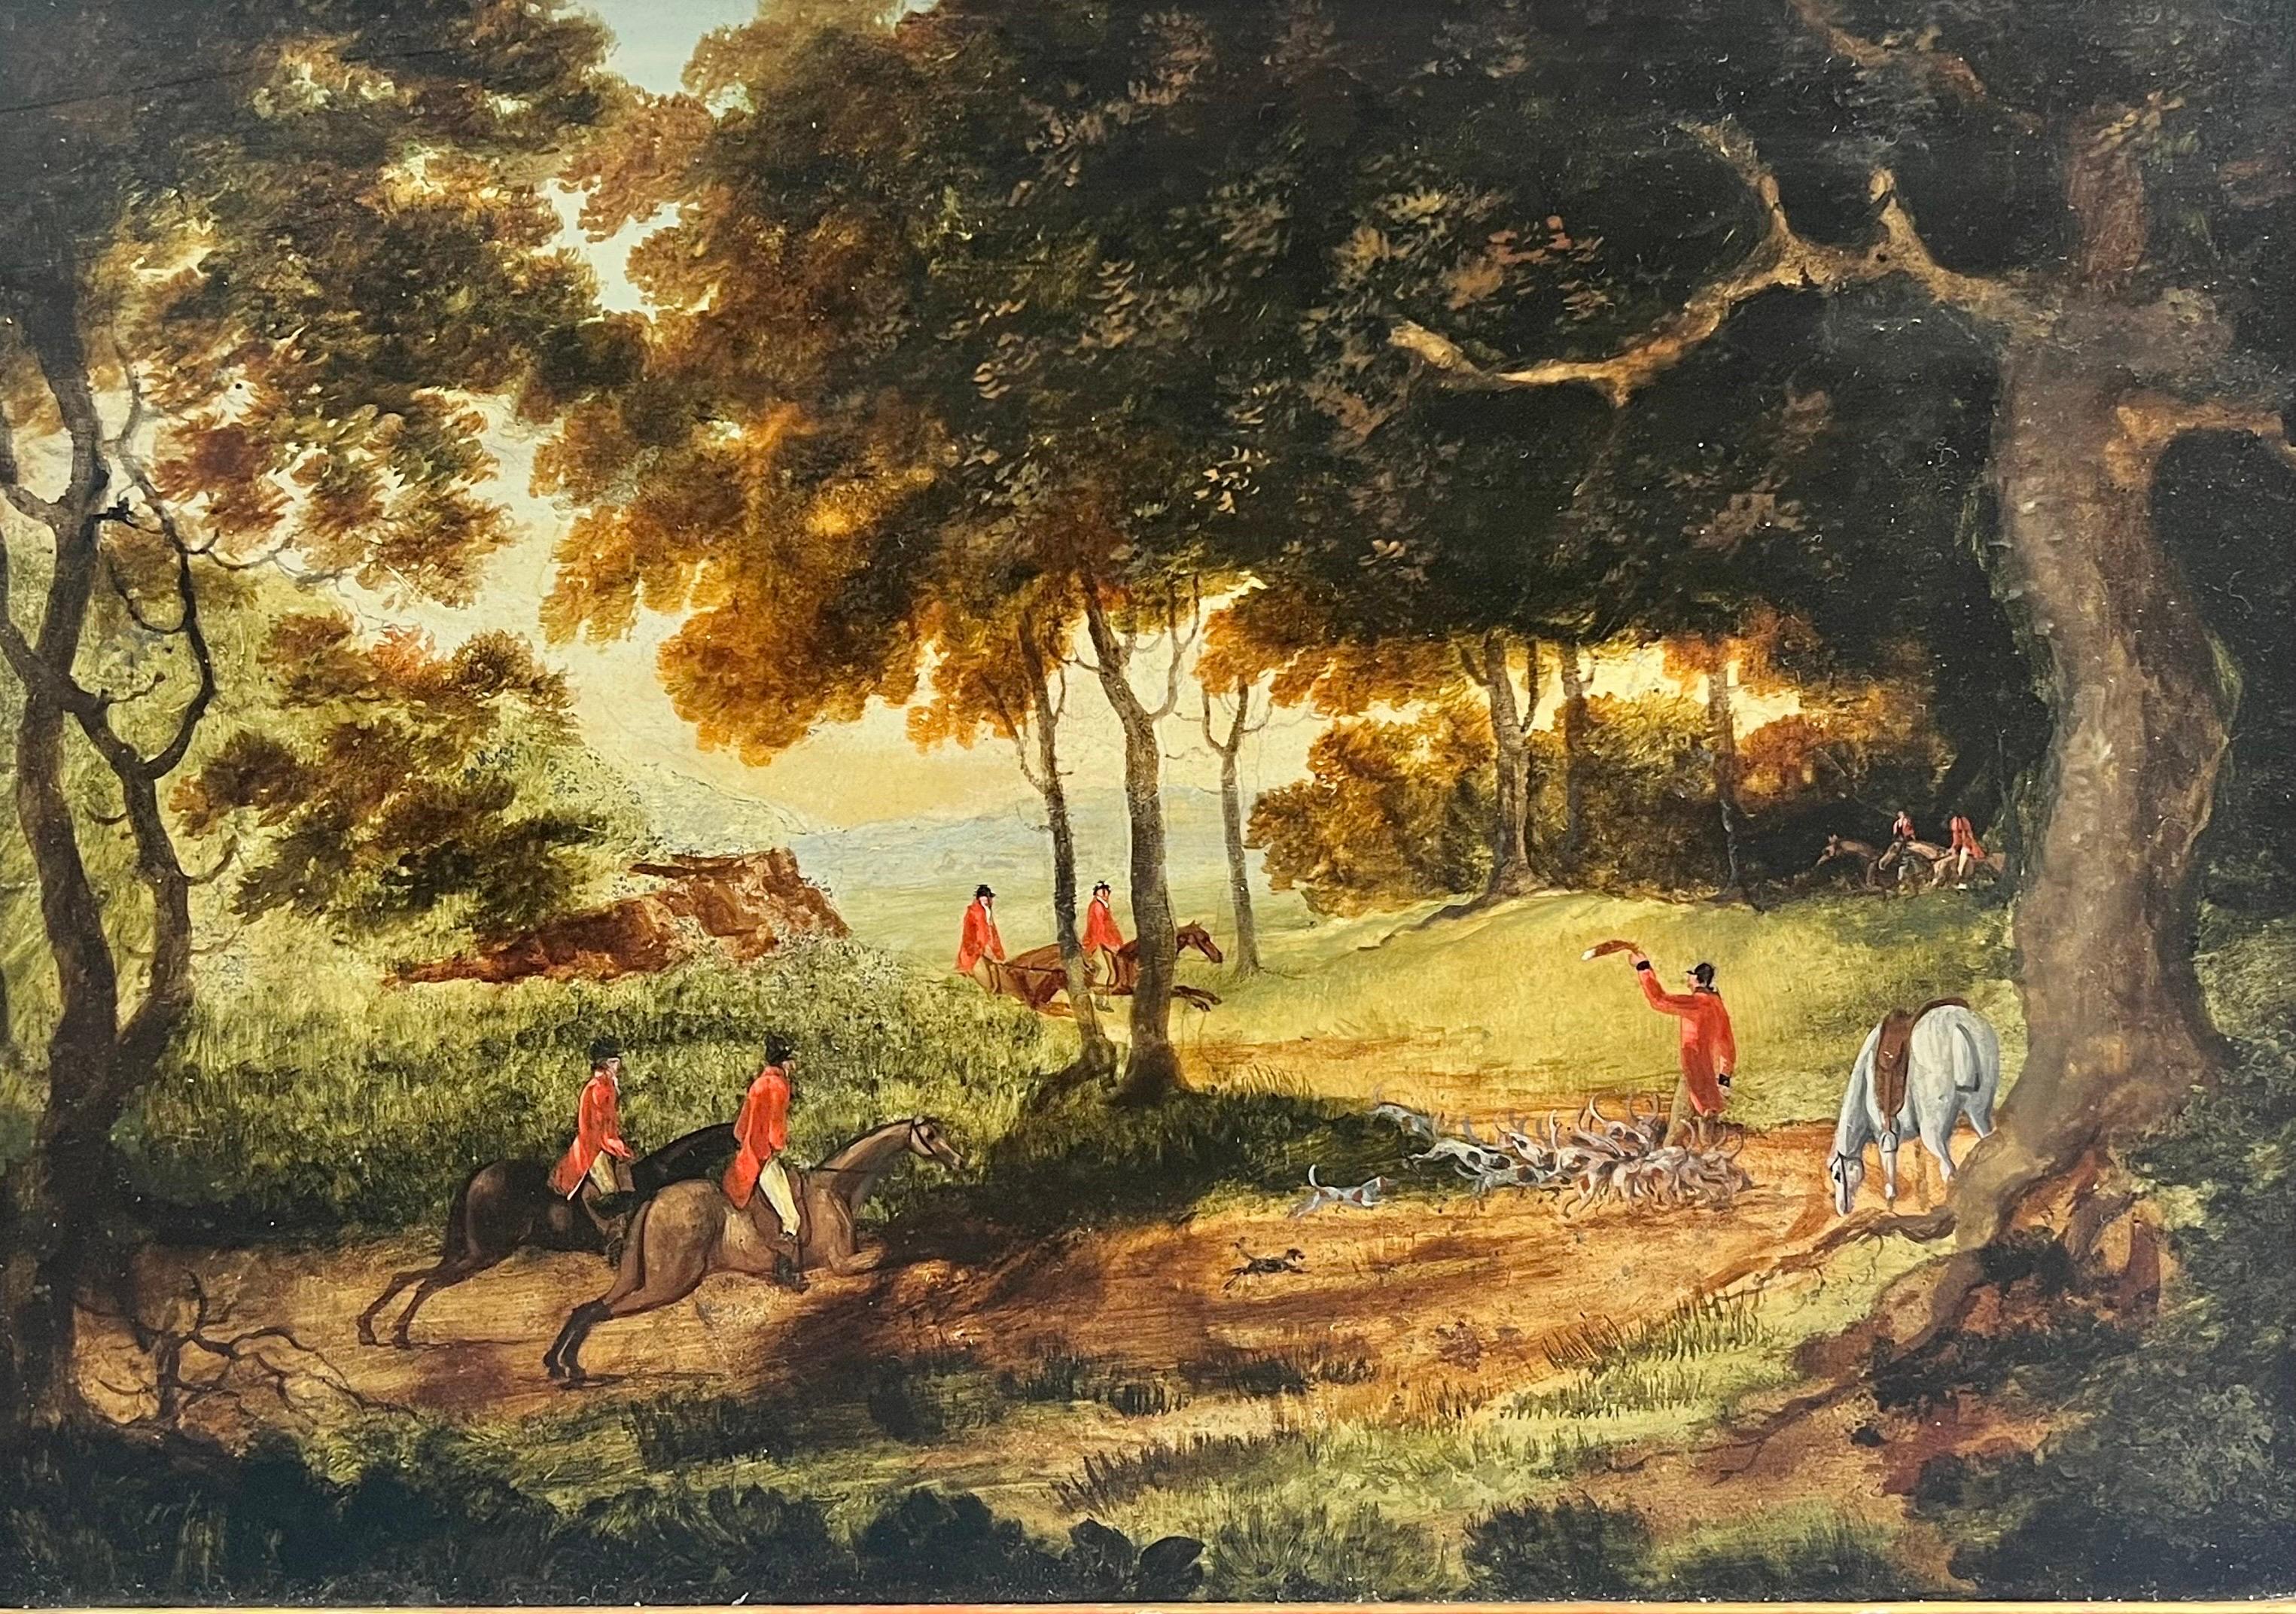 1850’s English Fox Hunting Scene Pack of Hounds, Huntsman & Horses in Woods